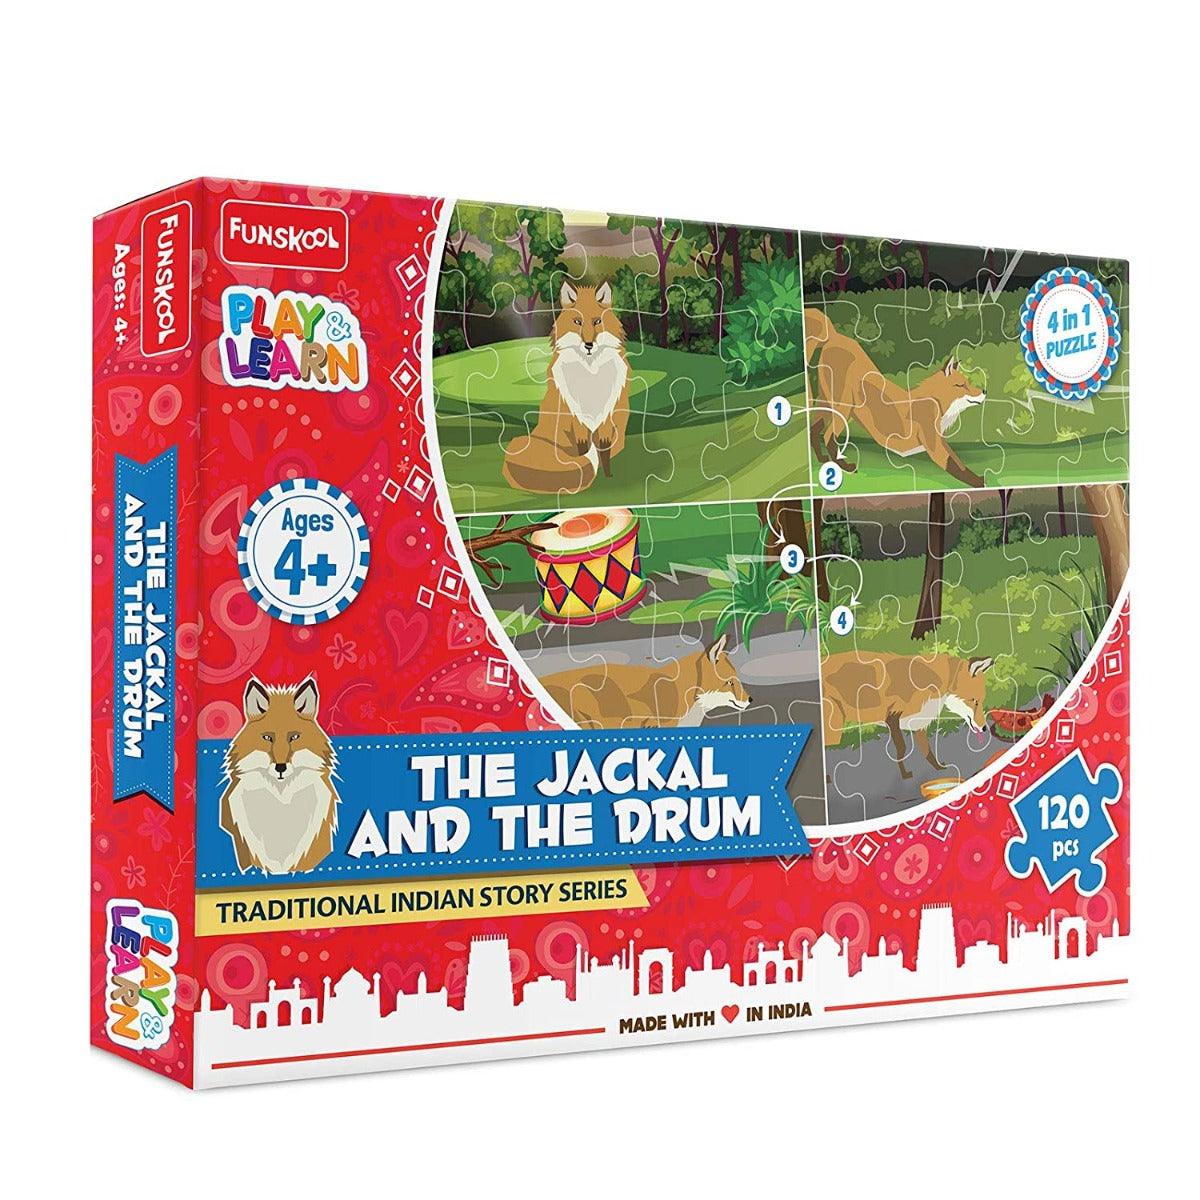 Funskool Traditional Indian Story Series - The Jackal and The Drum Puzzle